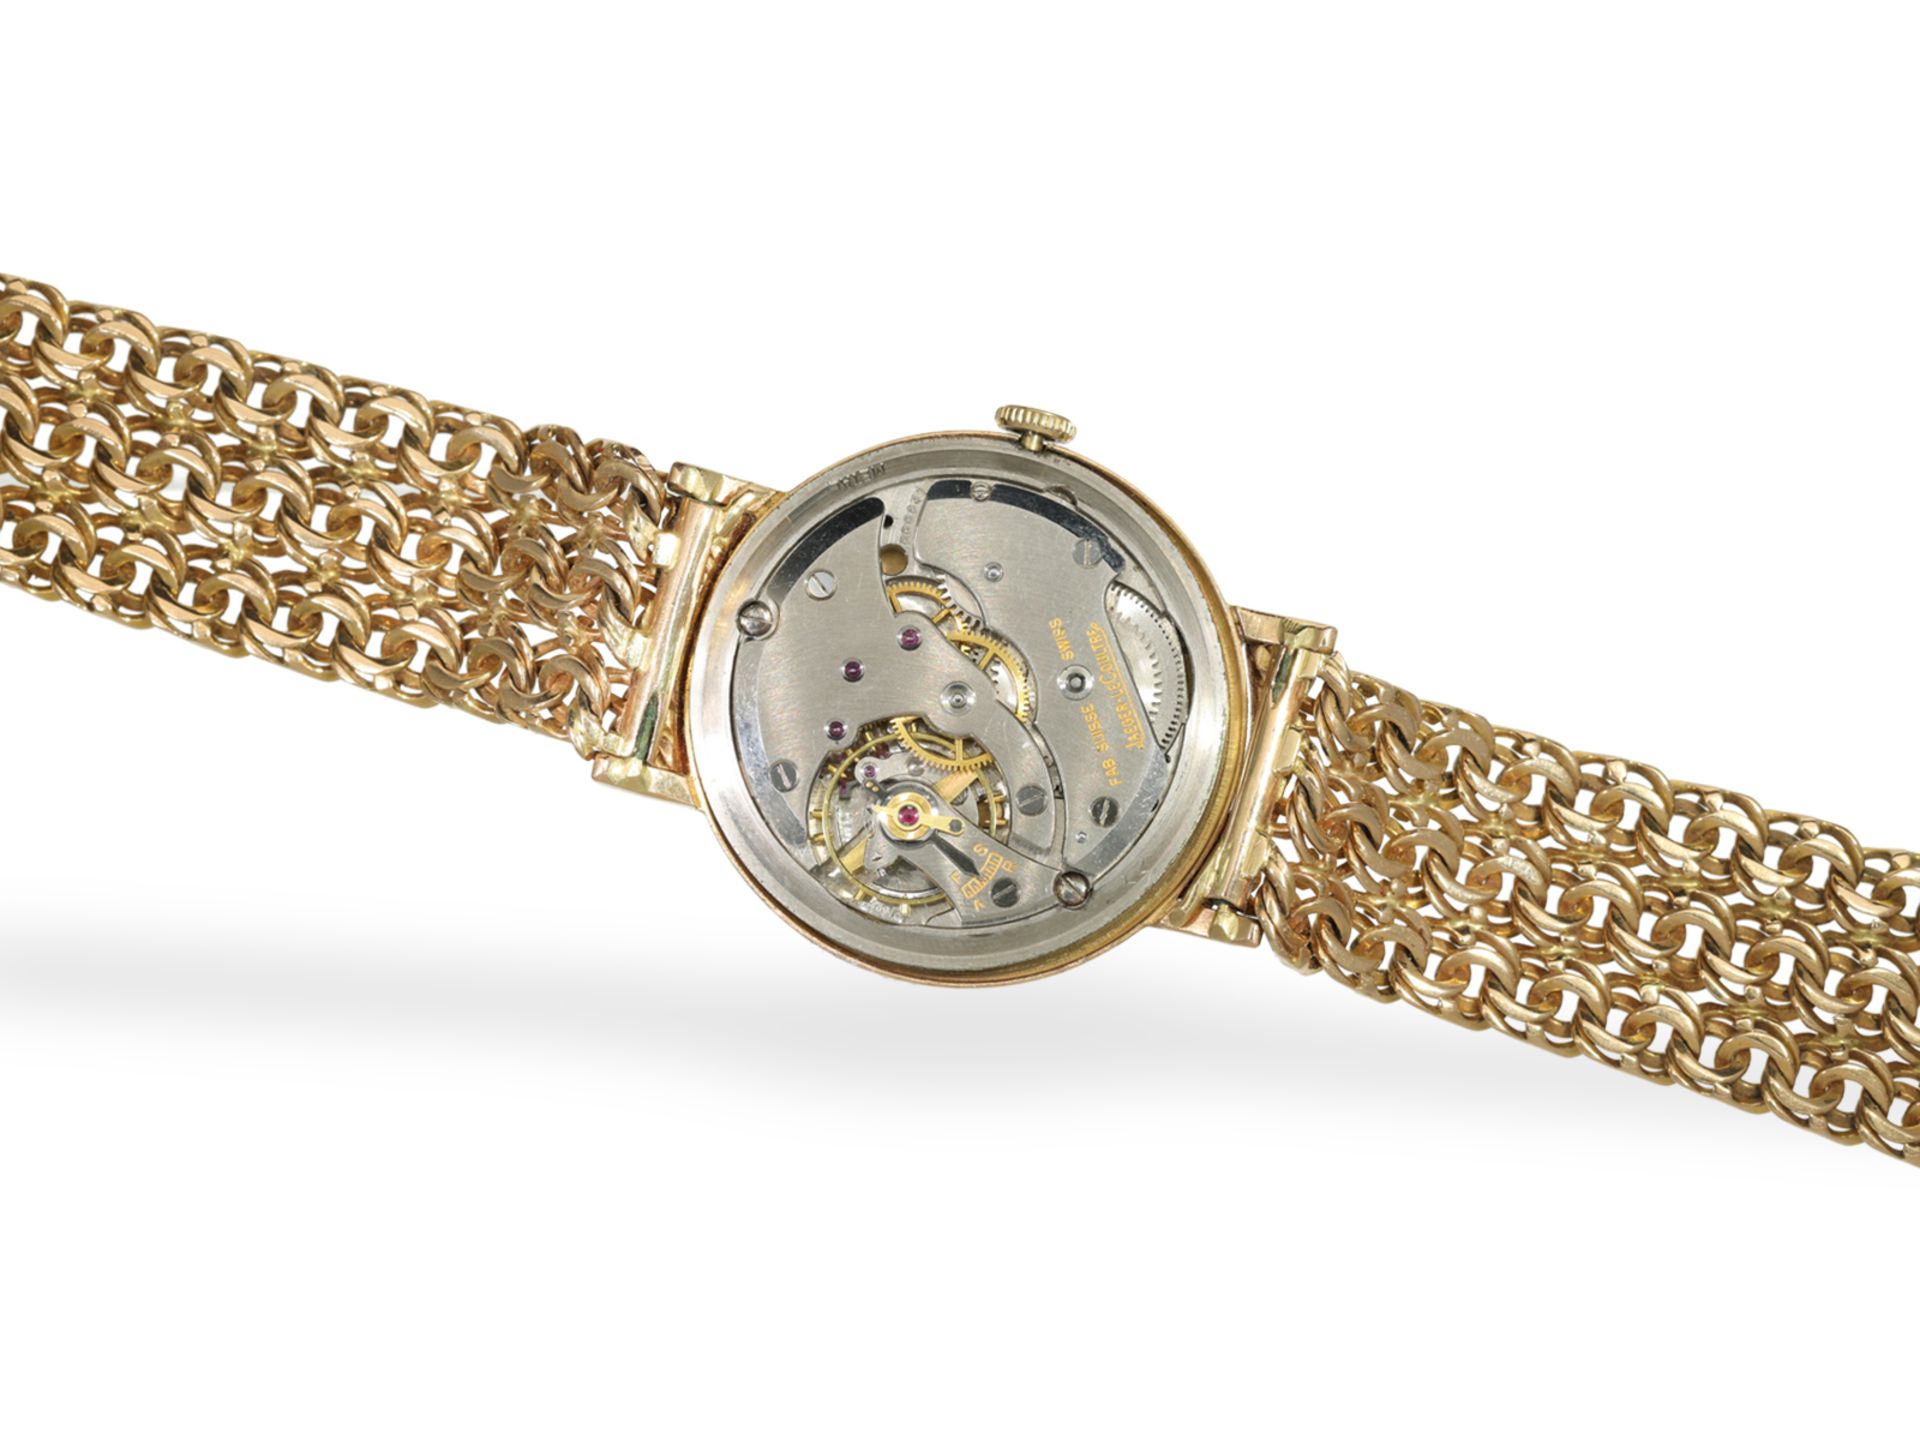 Wristwatch: large pink gold vintage men's watch by Jaeger LeCoultre, ca. 1950 - Image 3 of 5